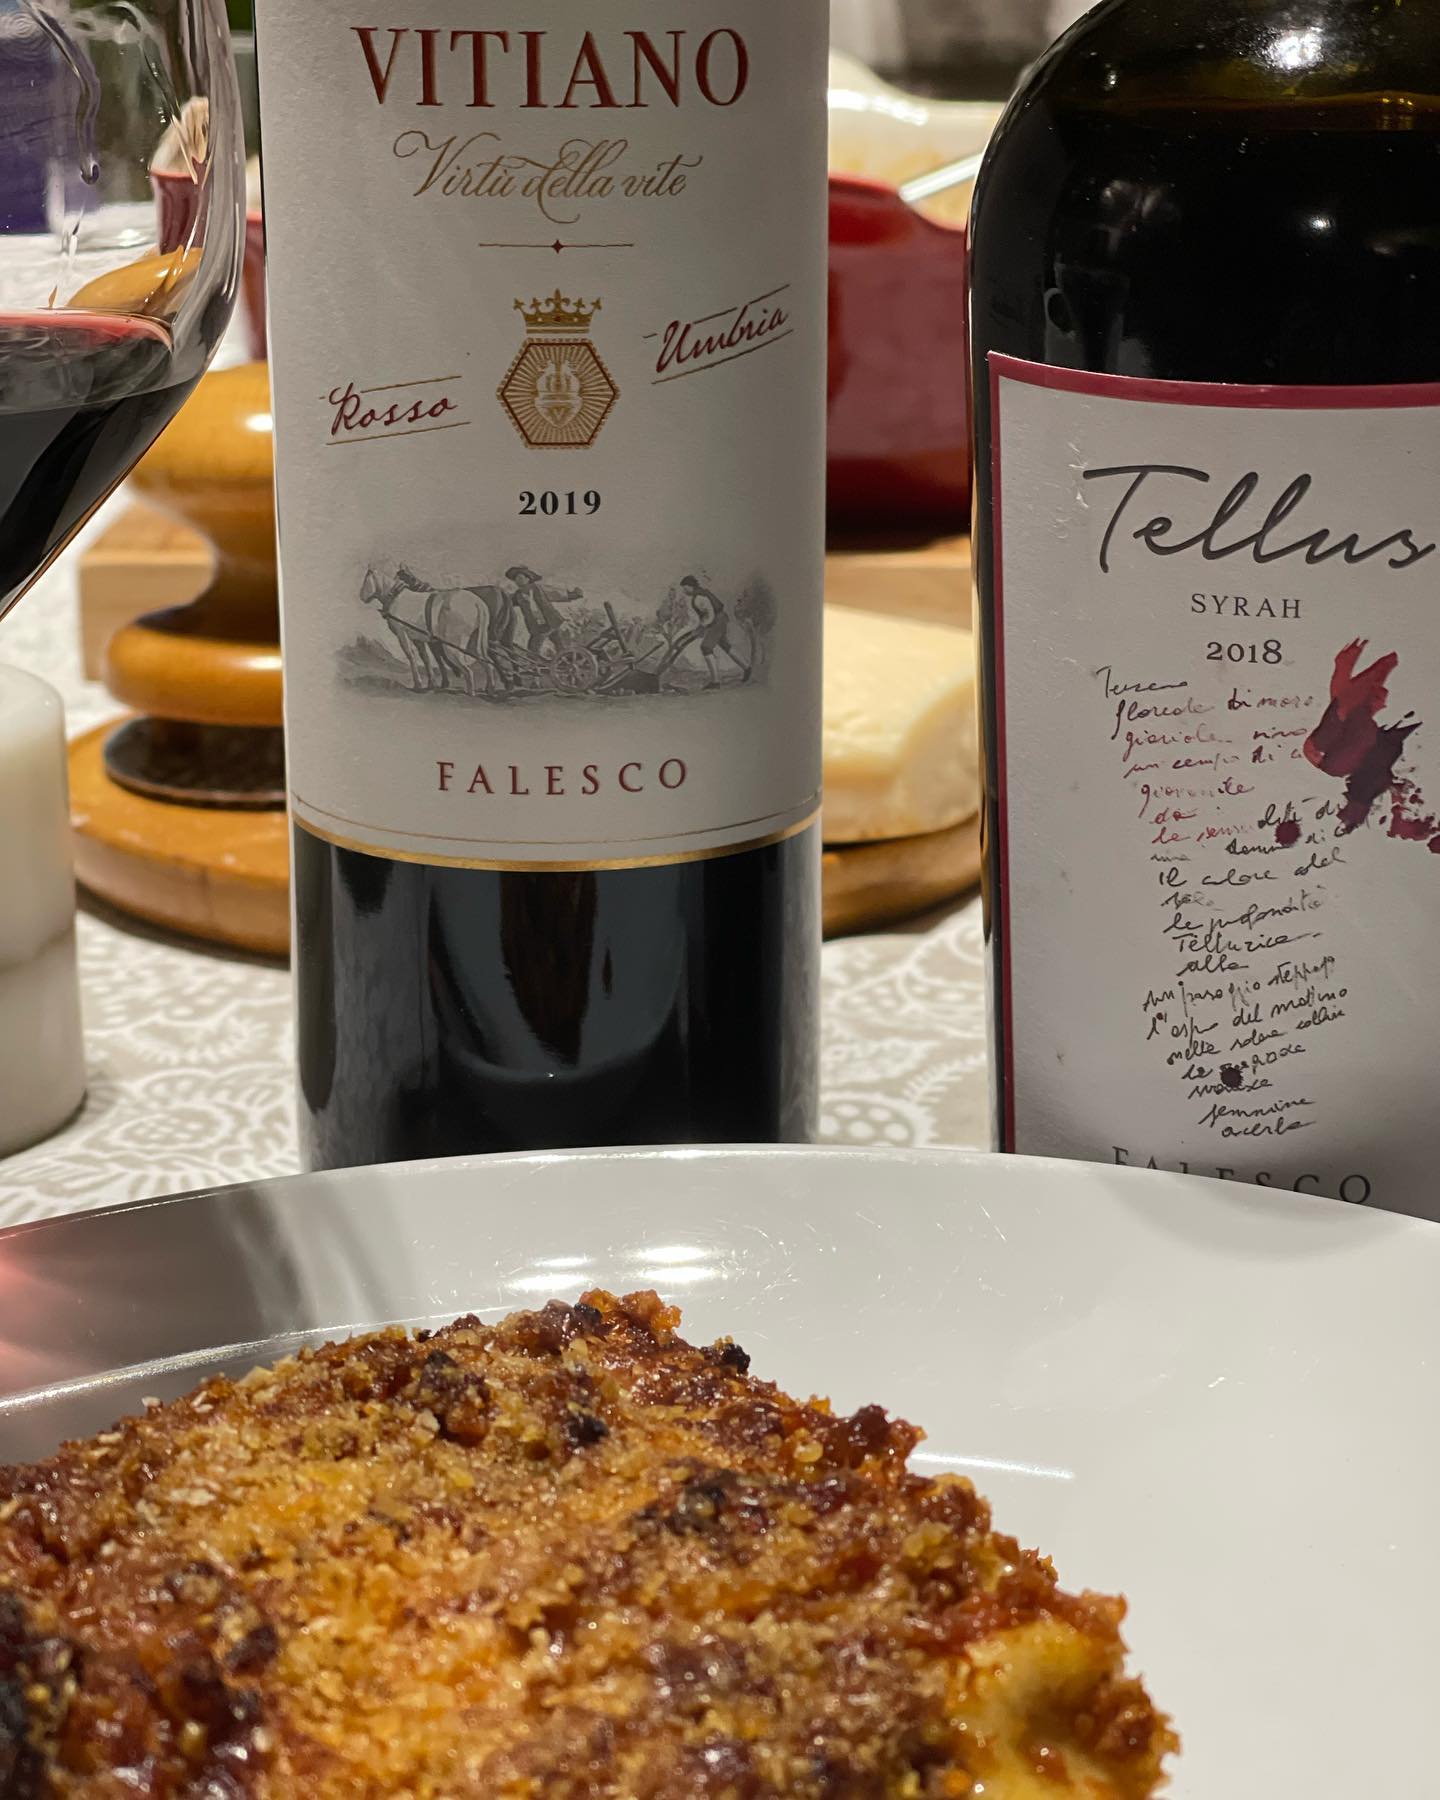 The quintessential Roman wines from @famigliacotarella Falesco. Someone said I should have Amatriciana with those: very true!.
@italianwinelover @italian_wines #roma #italianwine #redwine #amatriciana #foodandwine #aucklandeats